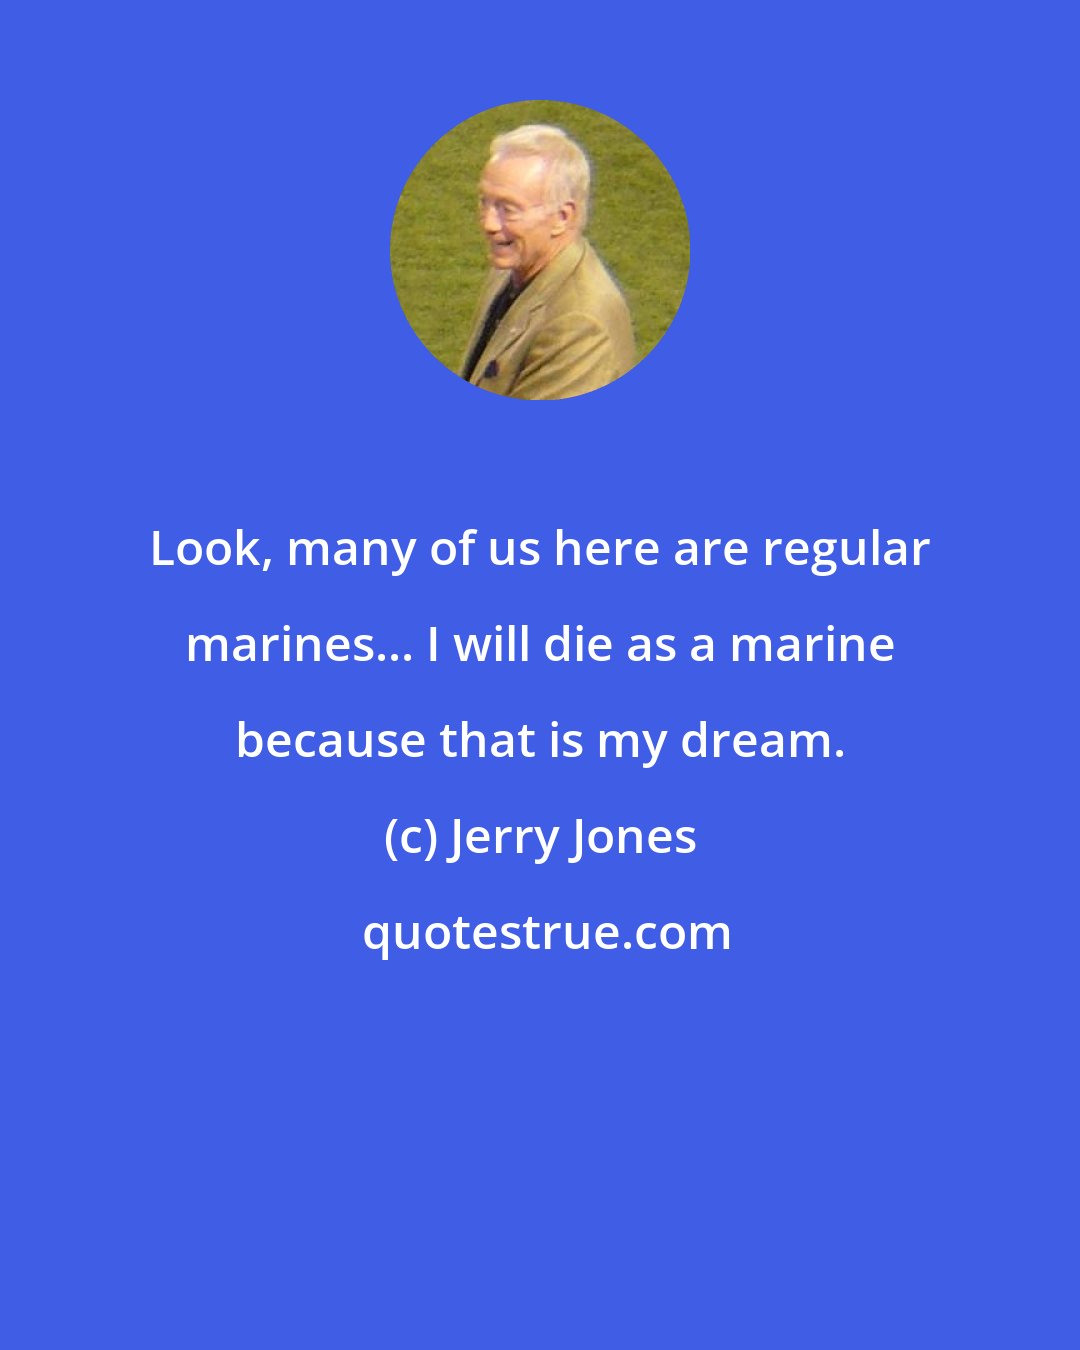 Jerry Jones: Look, many of us here are regular marines... I will die as a marine because that is my dream.